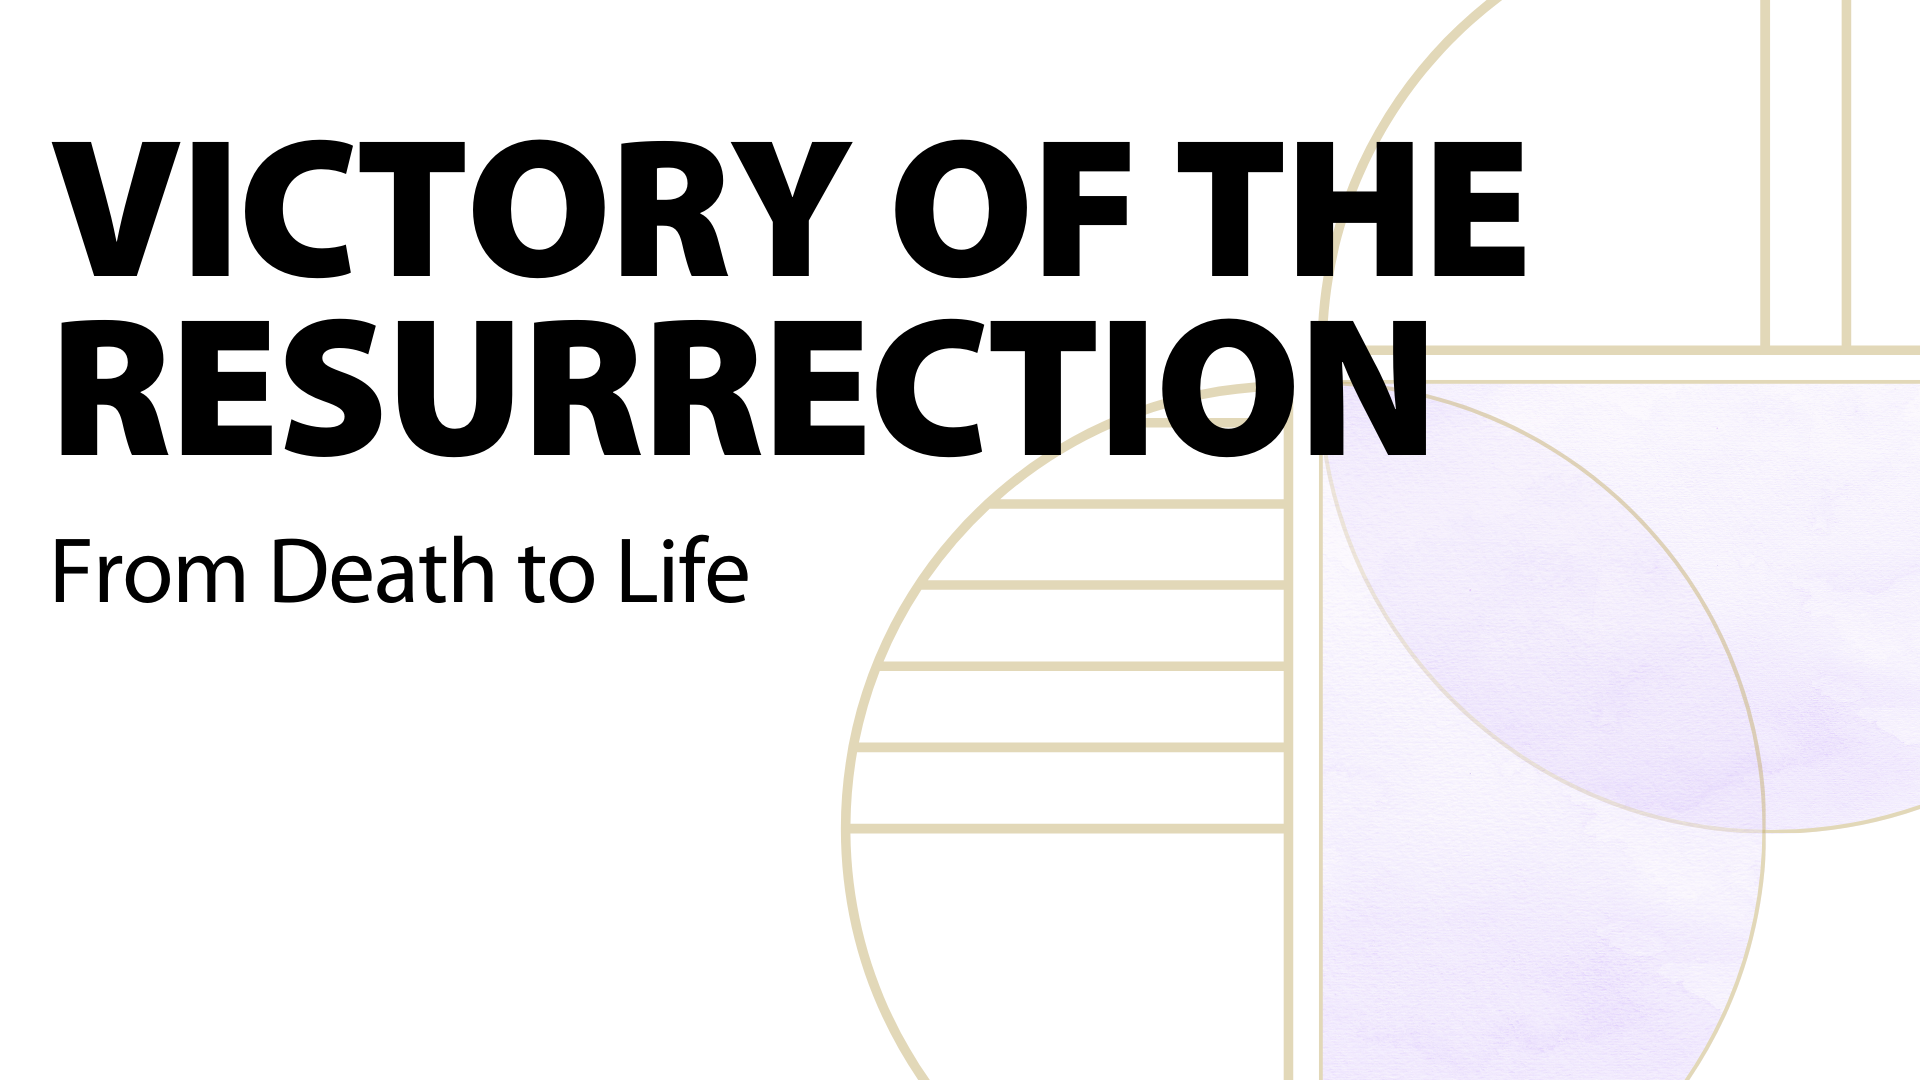 Victory of the Resurrection: From Death to Life